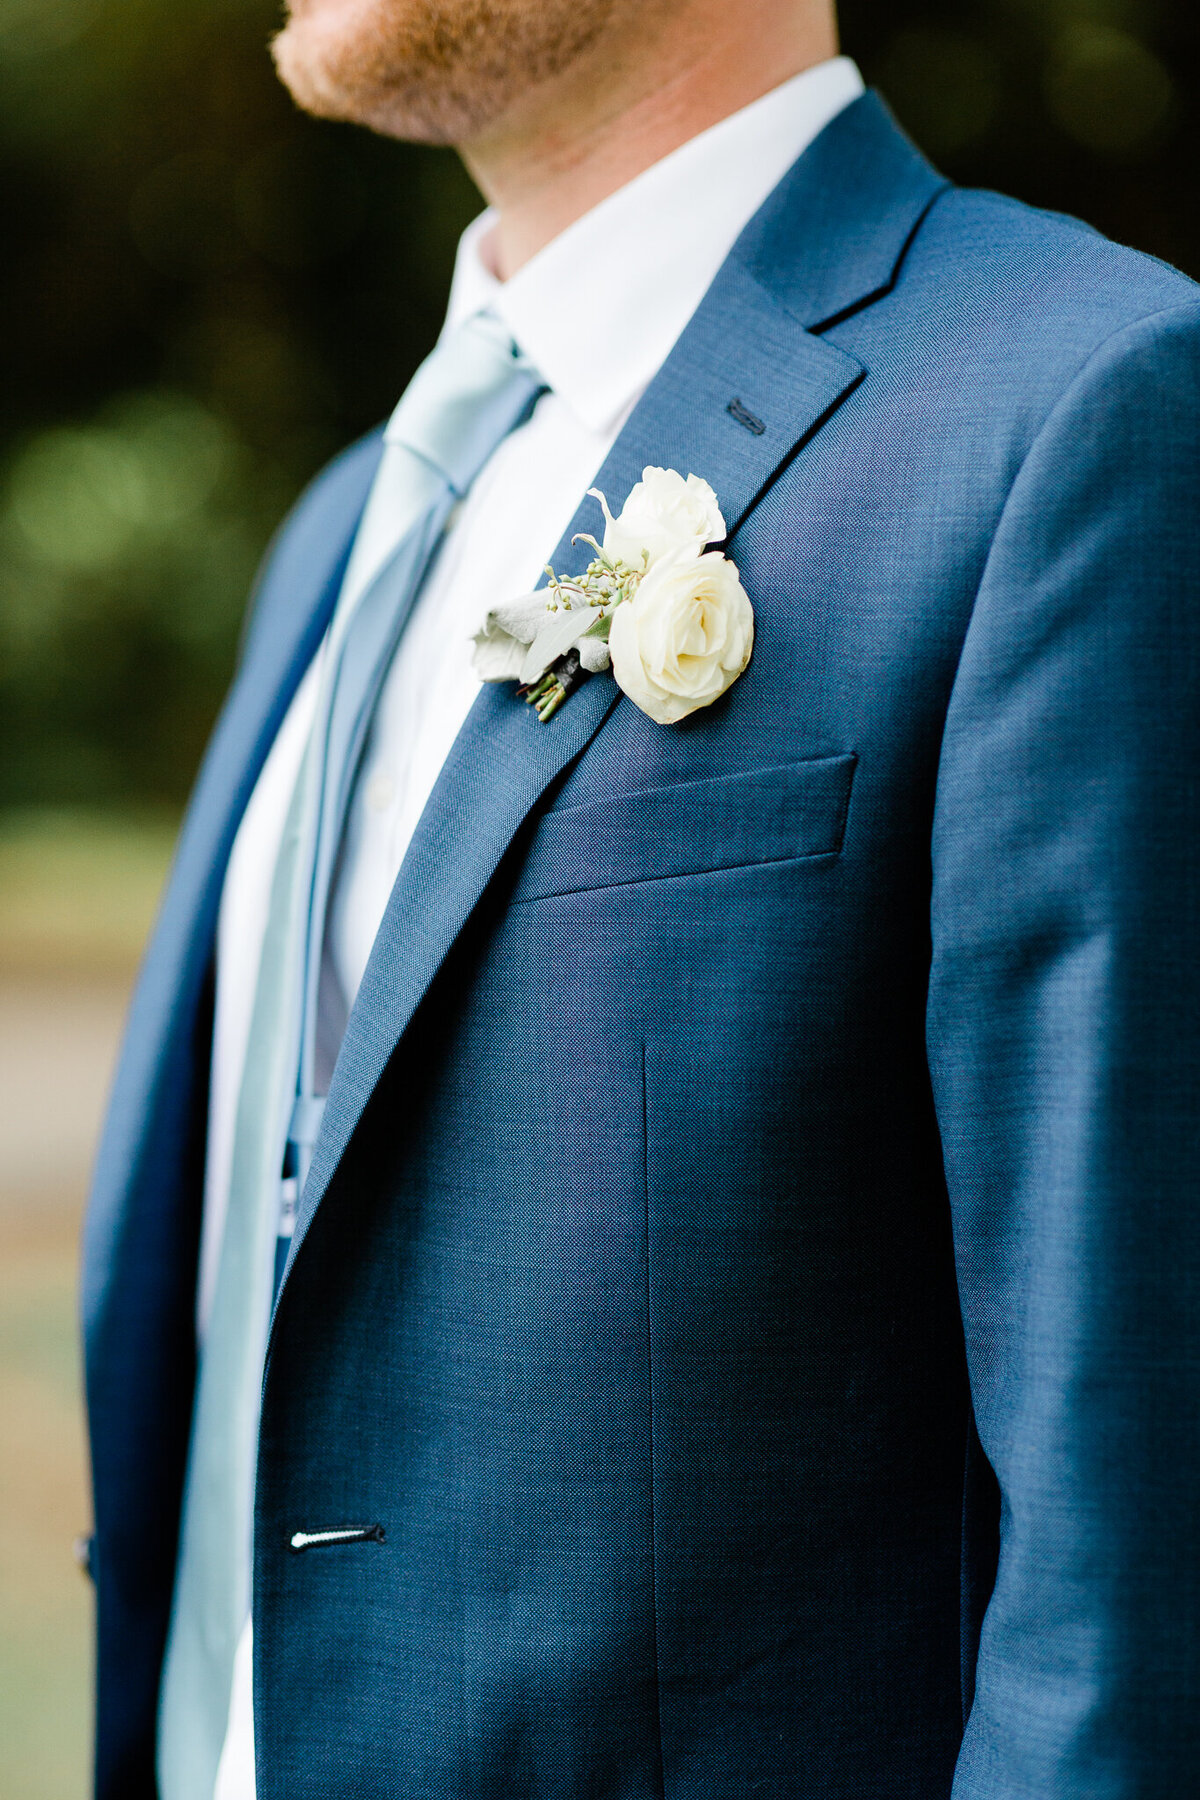 Groom Portrait of Suit and Boutonniere